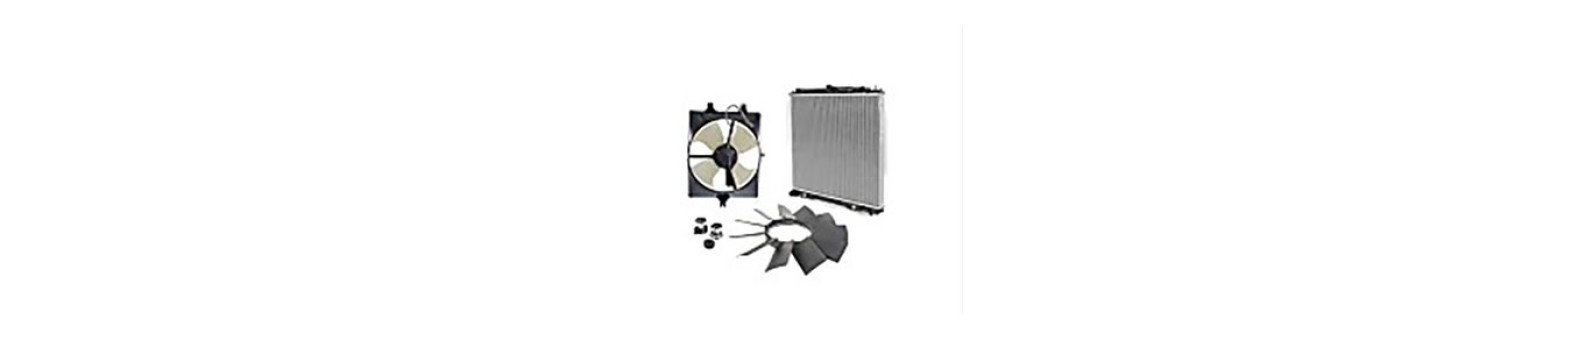 Radiator, Fans, Cooling System & Components 